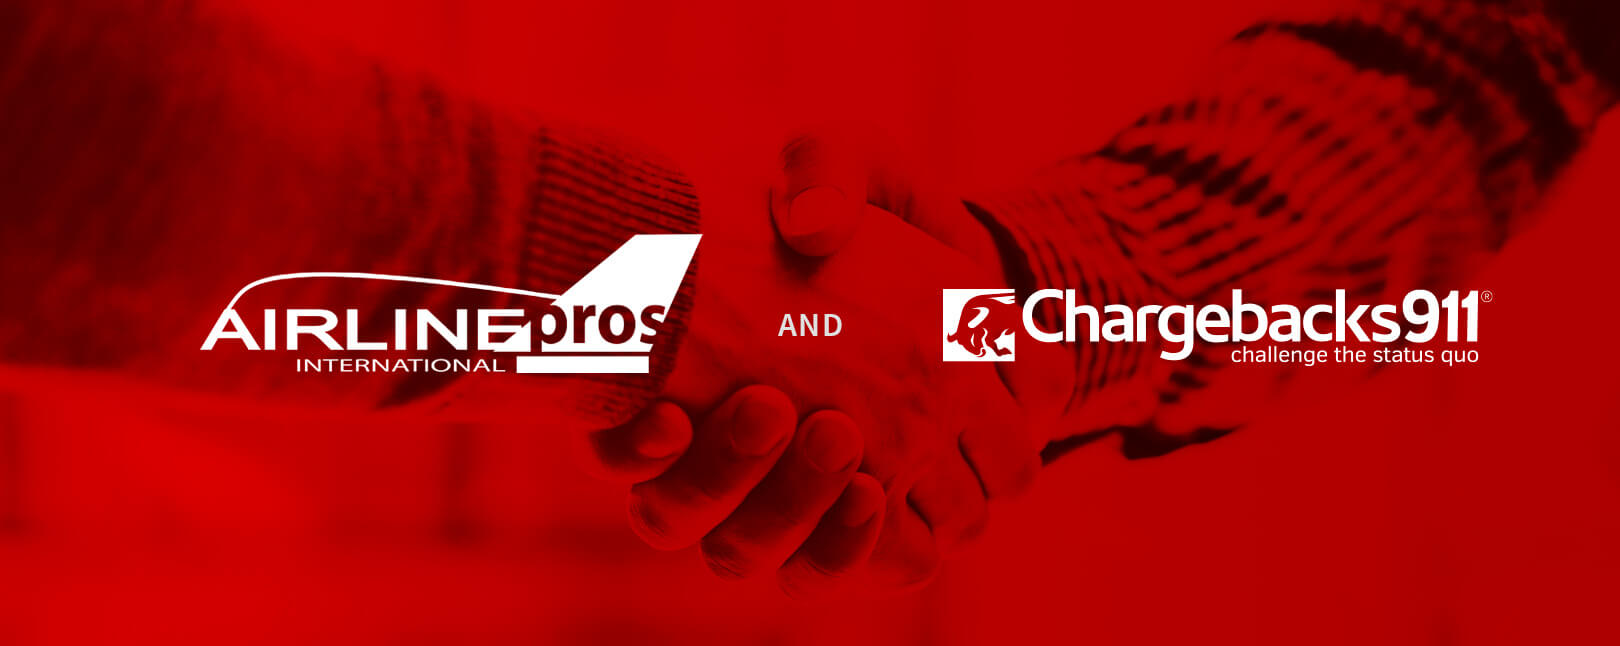 Chargebacks911® Takes to the Skies with New AirlinePros Partnership